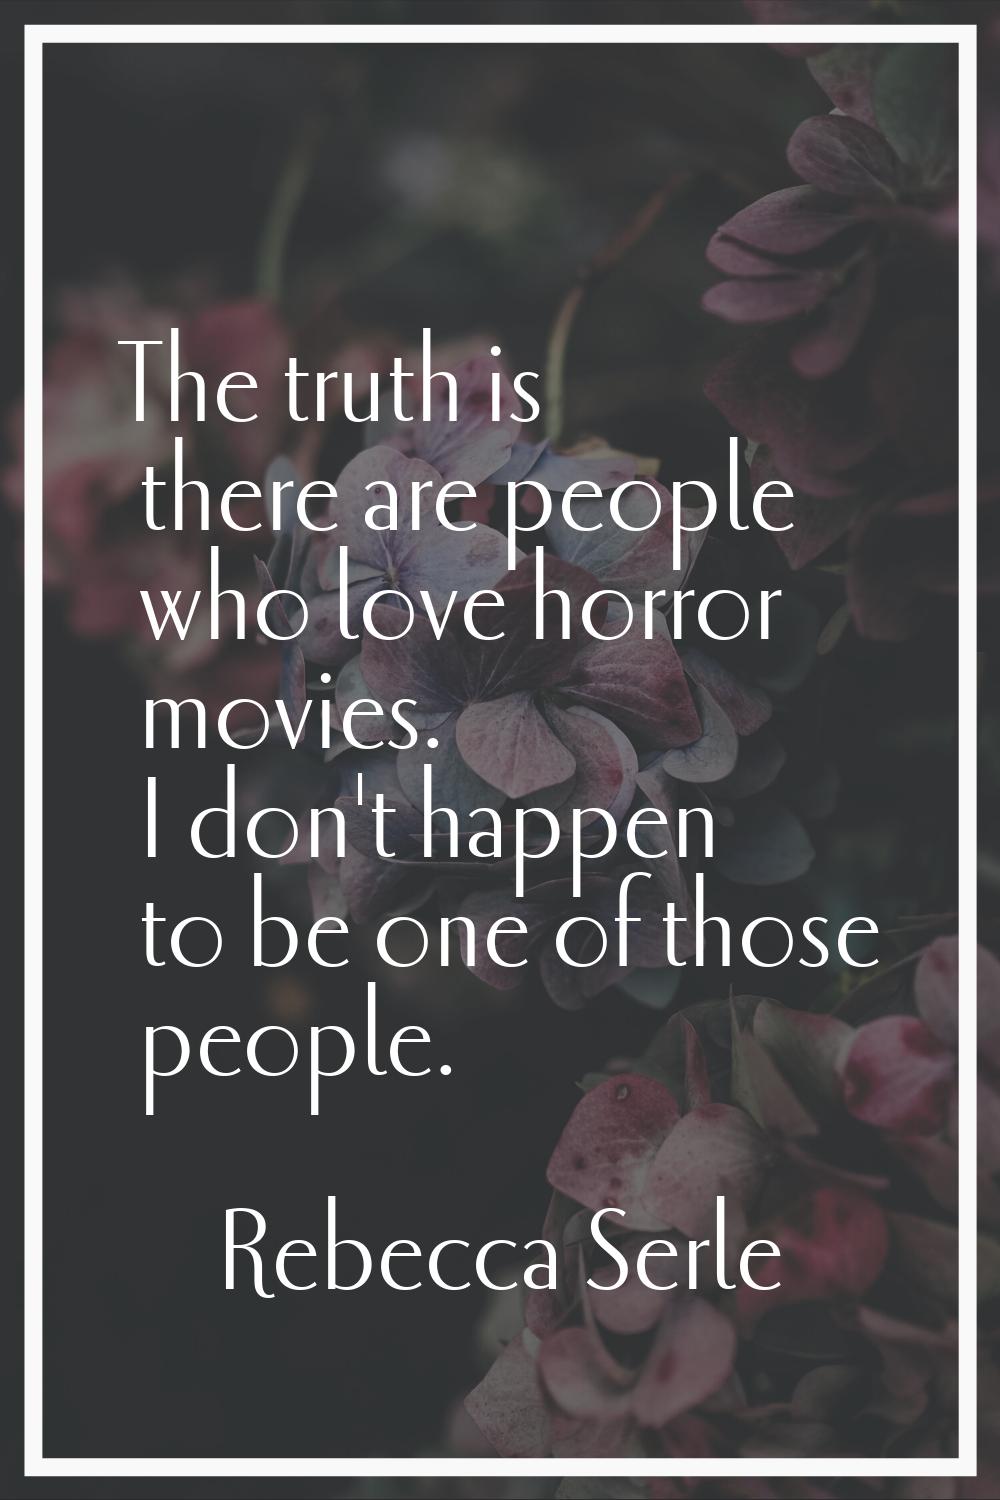 The truth is there are people who love horror movies. I don't happen to be one of those people.